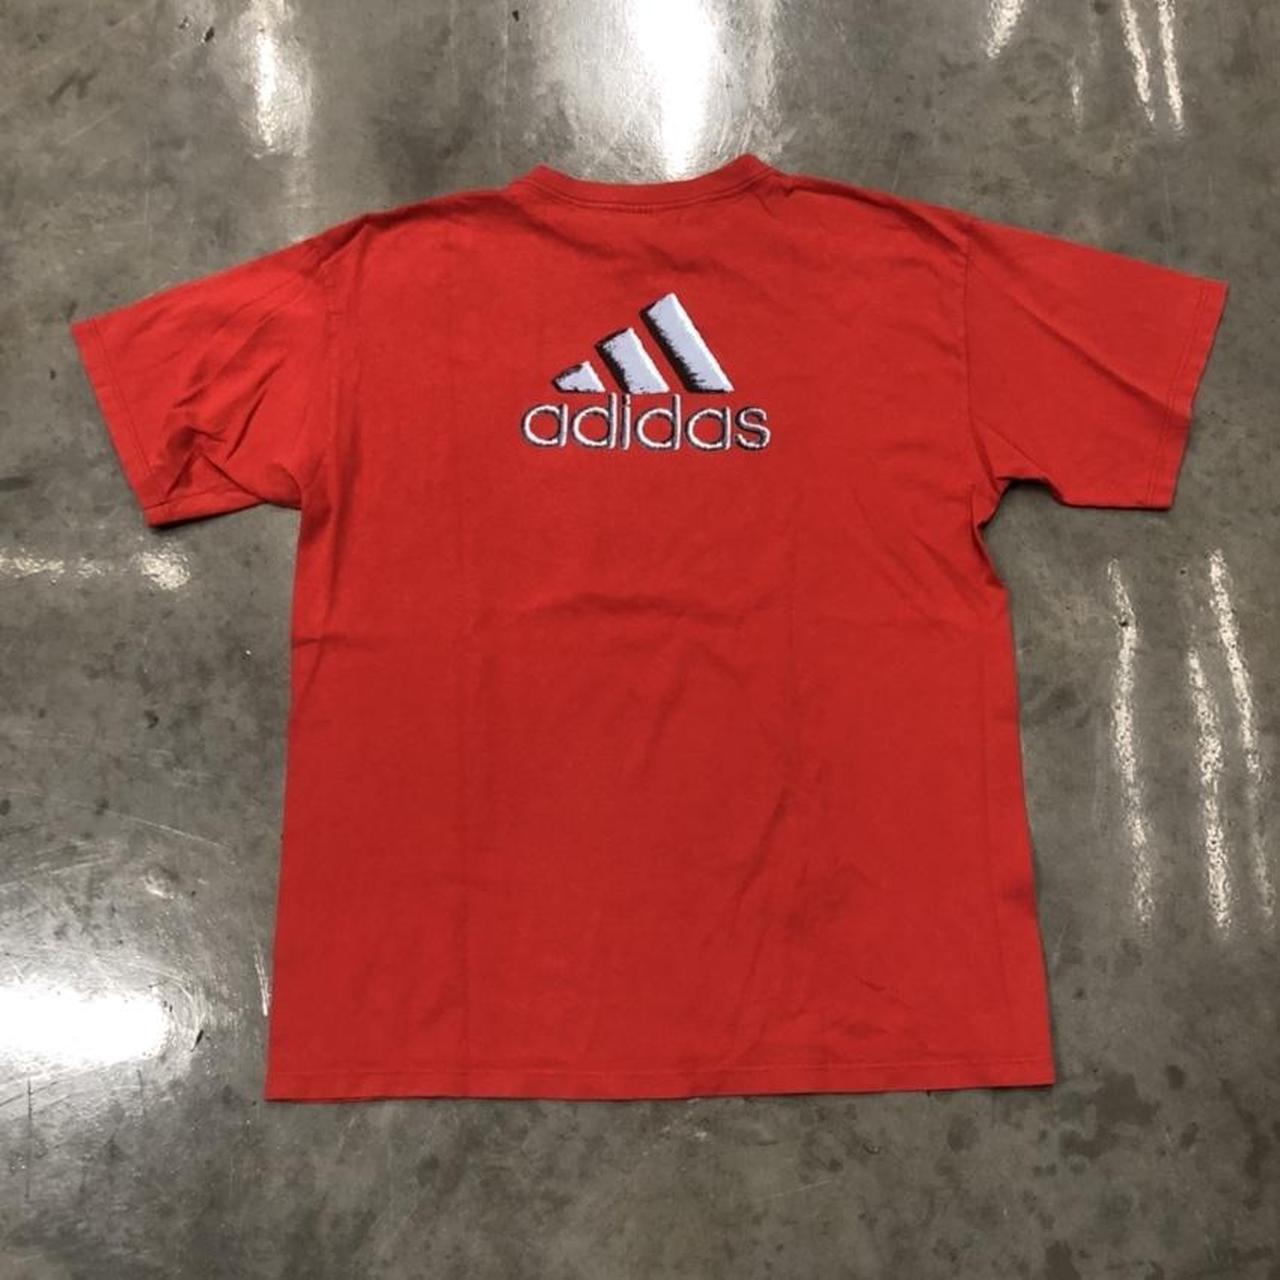 Adidas Men's Red and Silver T-shirt (2)